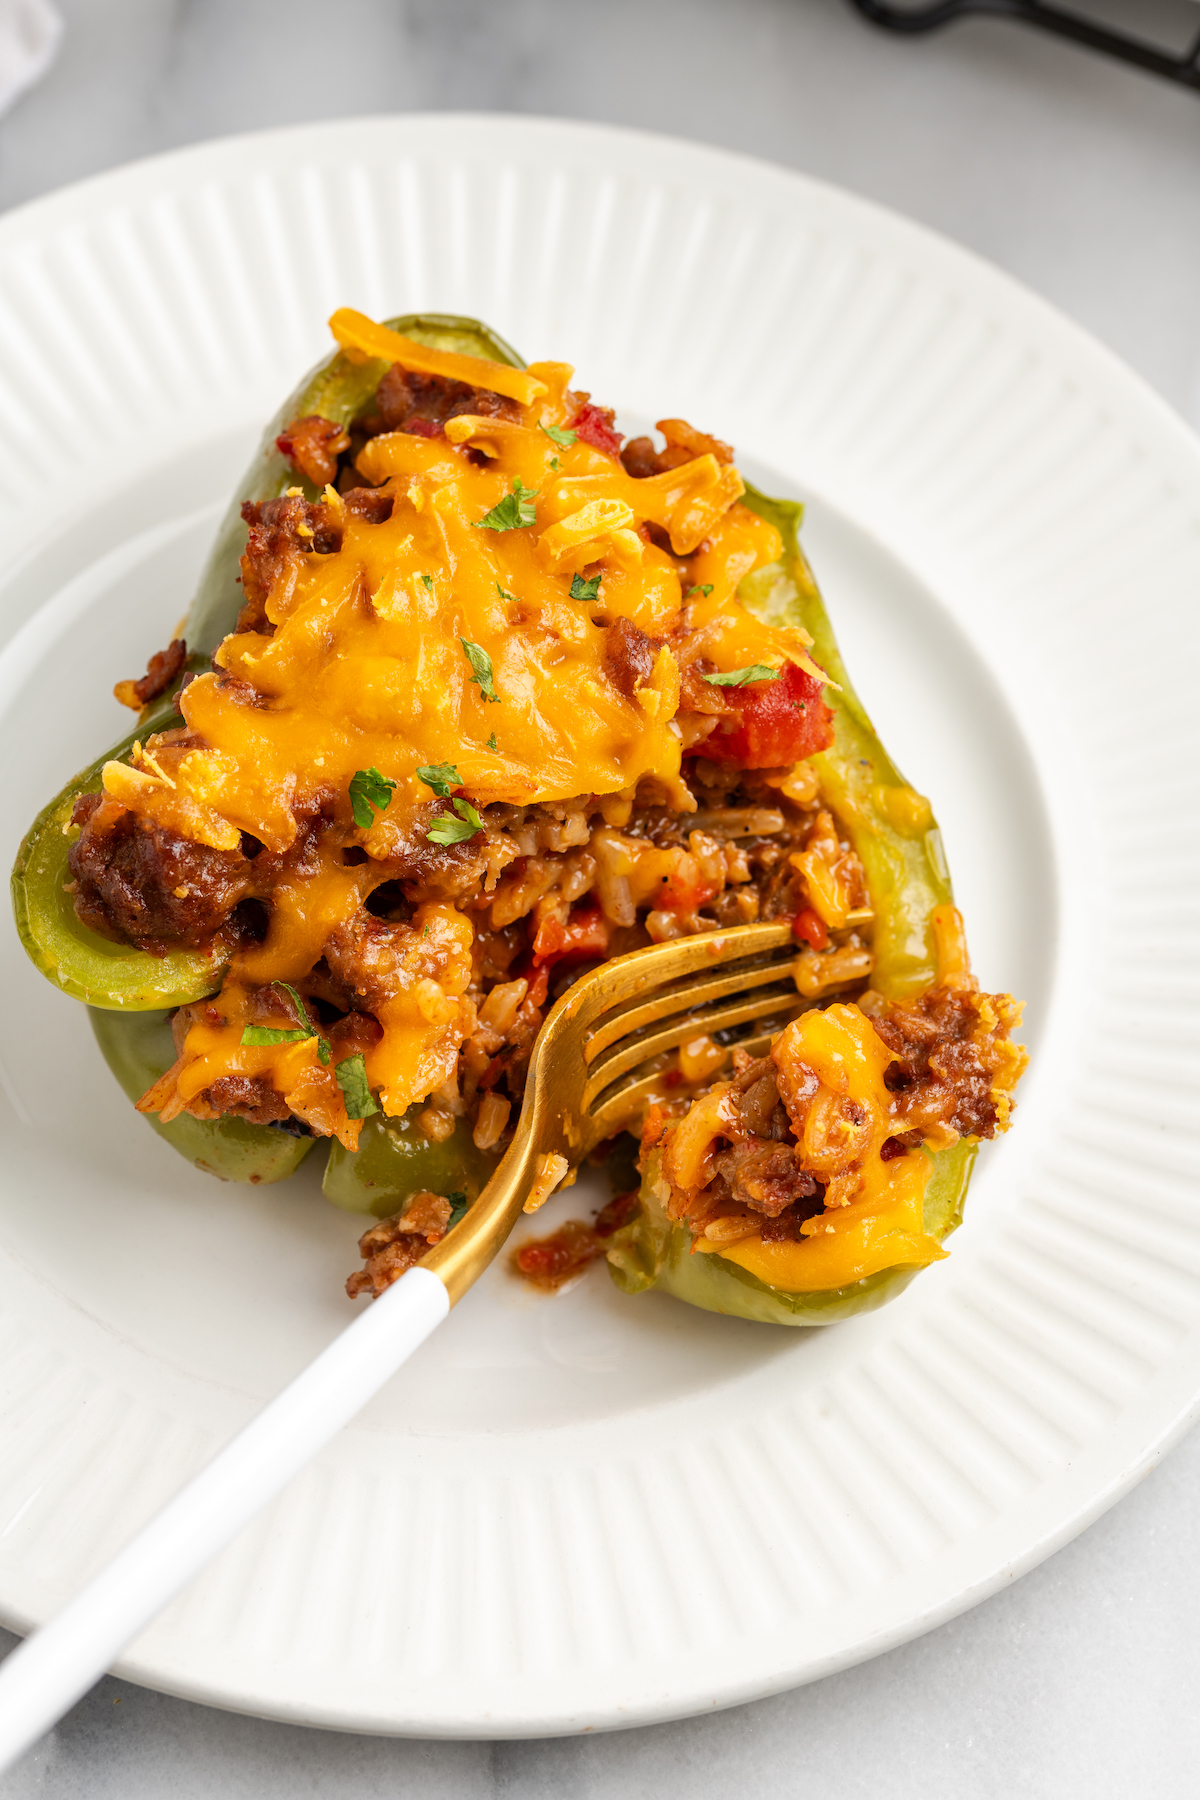 Overhead view of fork cutting into vegan stuffed pepper on plate